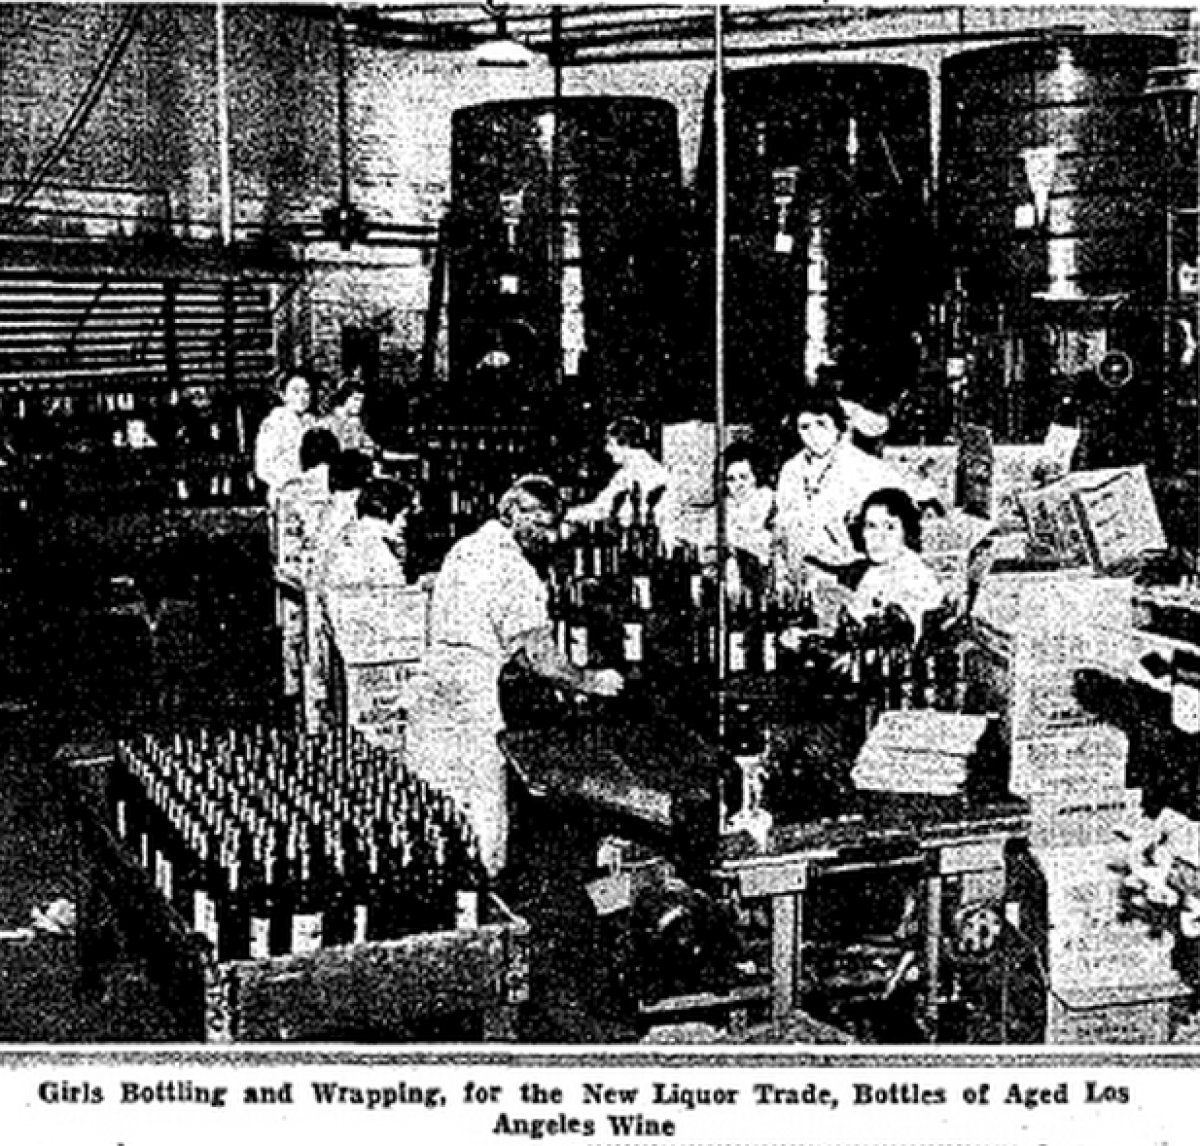 This photo was published in a horizontal series on Page 6 of the Dec. 6, 1933, Los Angeles Times under the headline "Flow of Legal Liquor Starts Again in Los Angeles as Prohibition Officially Ceases."